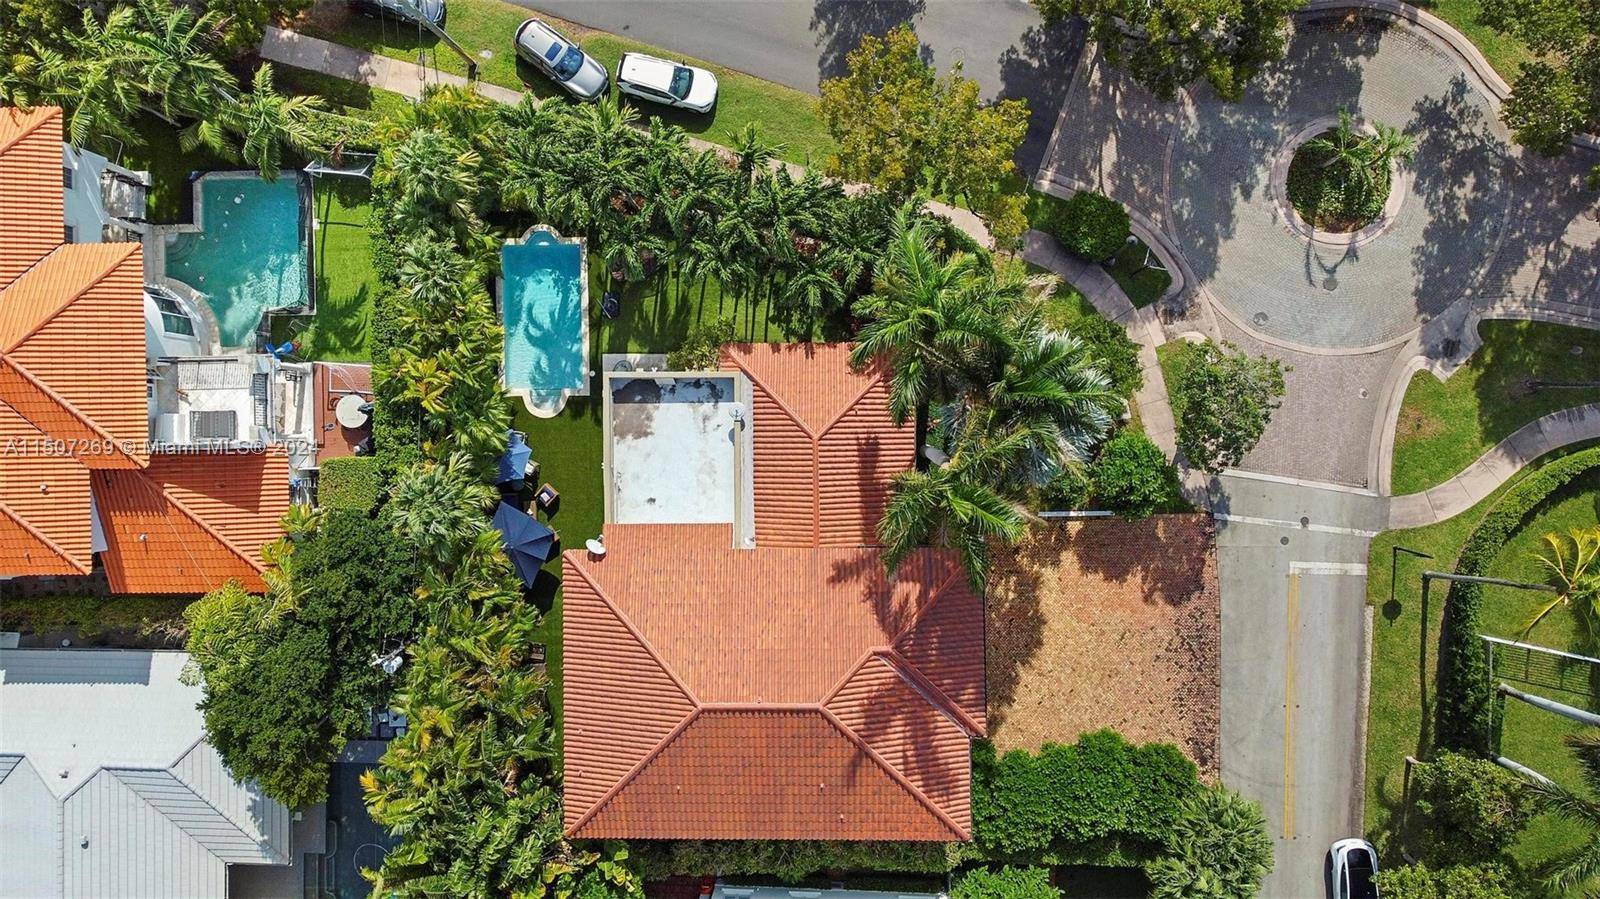 BEAUTIFUL FULLY FURNISHED 2 STORY HOME WITH 5 BEDROOMS, 5 BATHS AND 1 CAR GARAGE IN VERY DESIRABLE AREA OF KEY BISCAYNE.